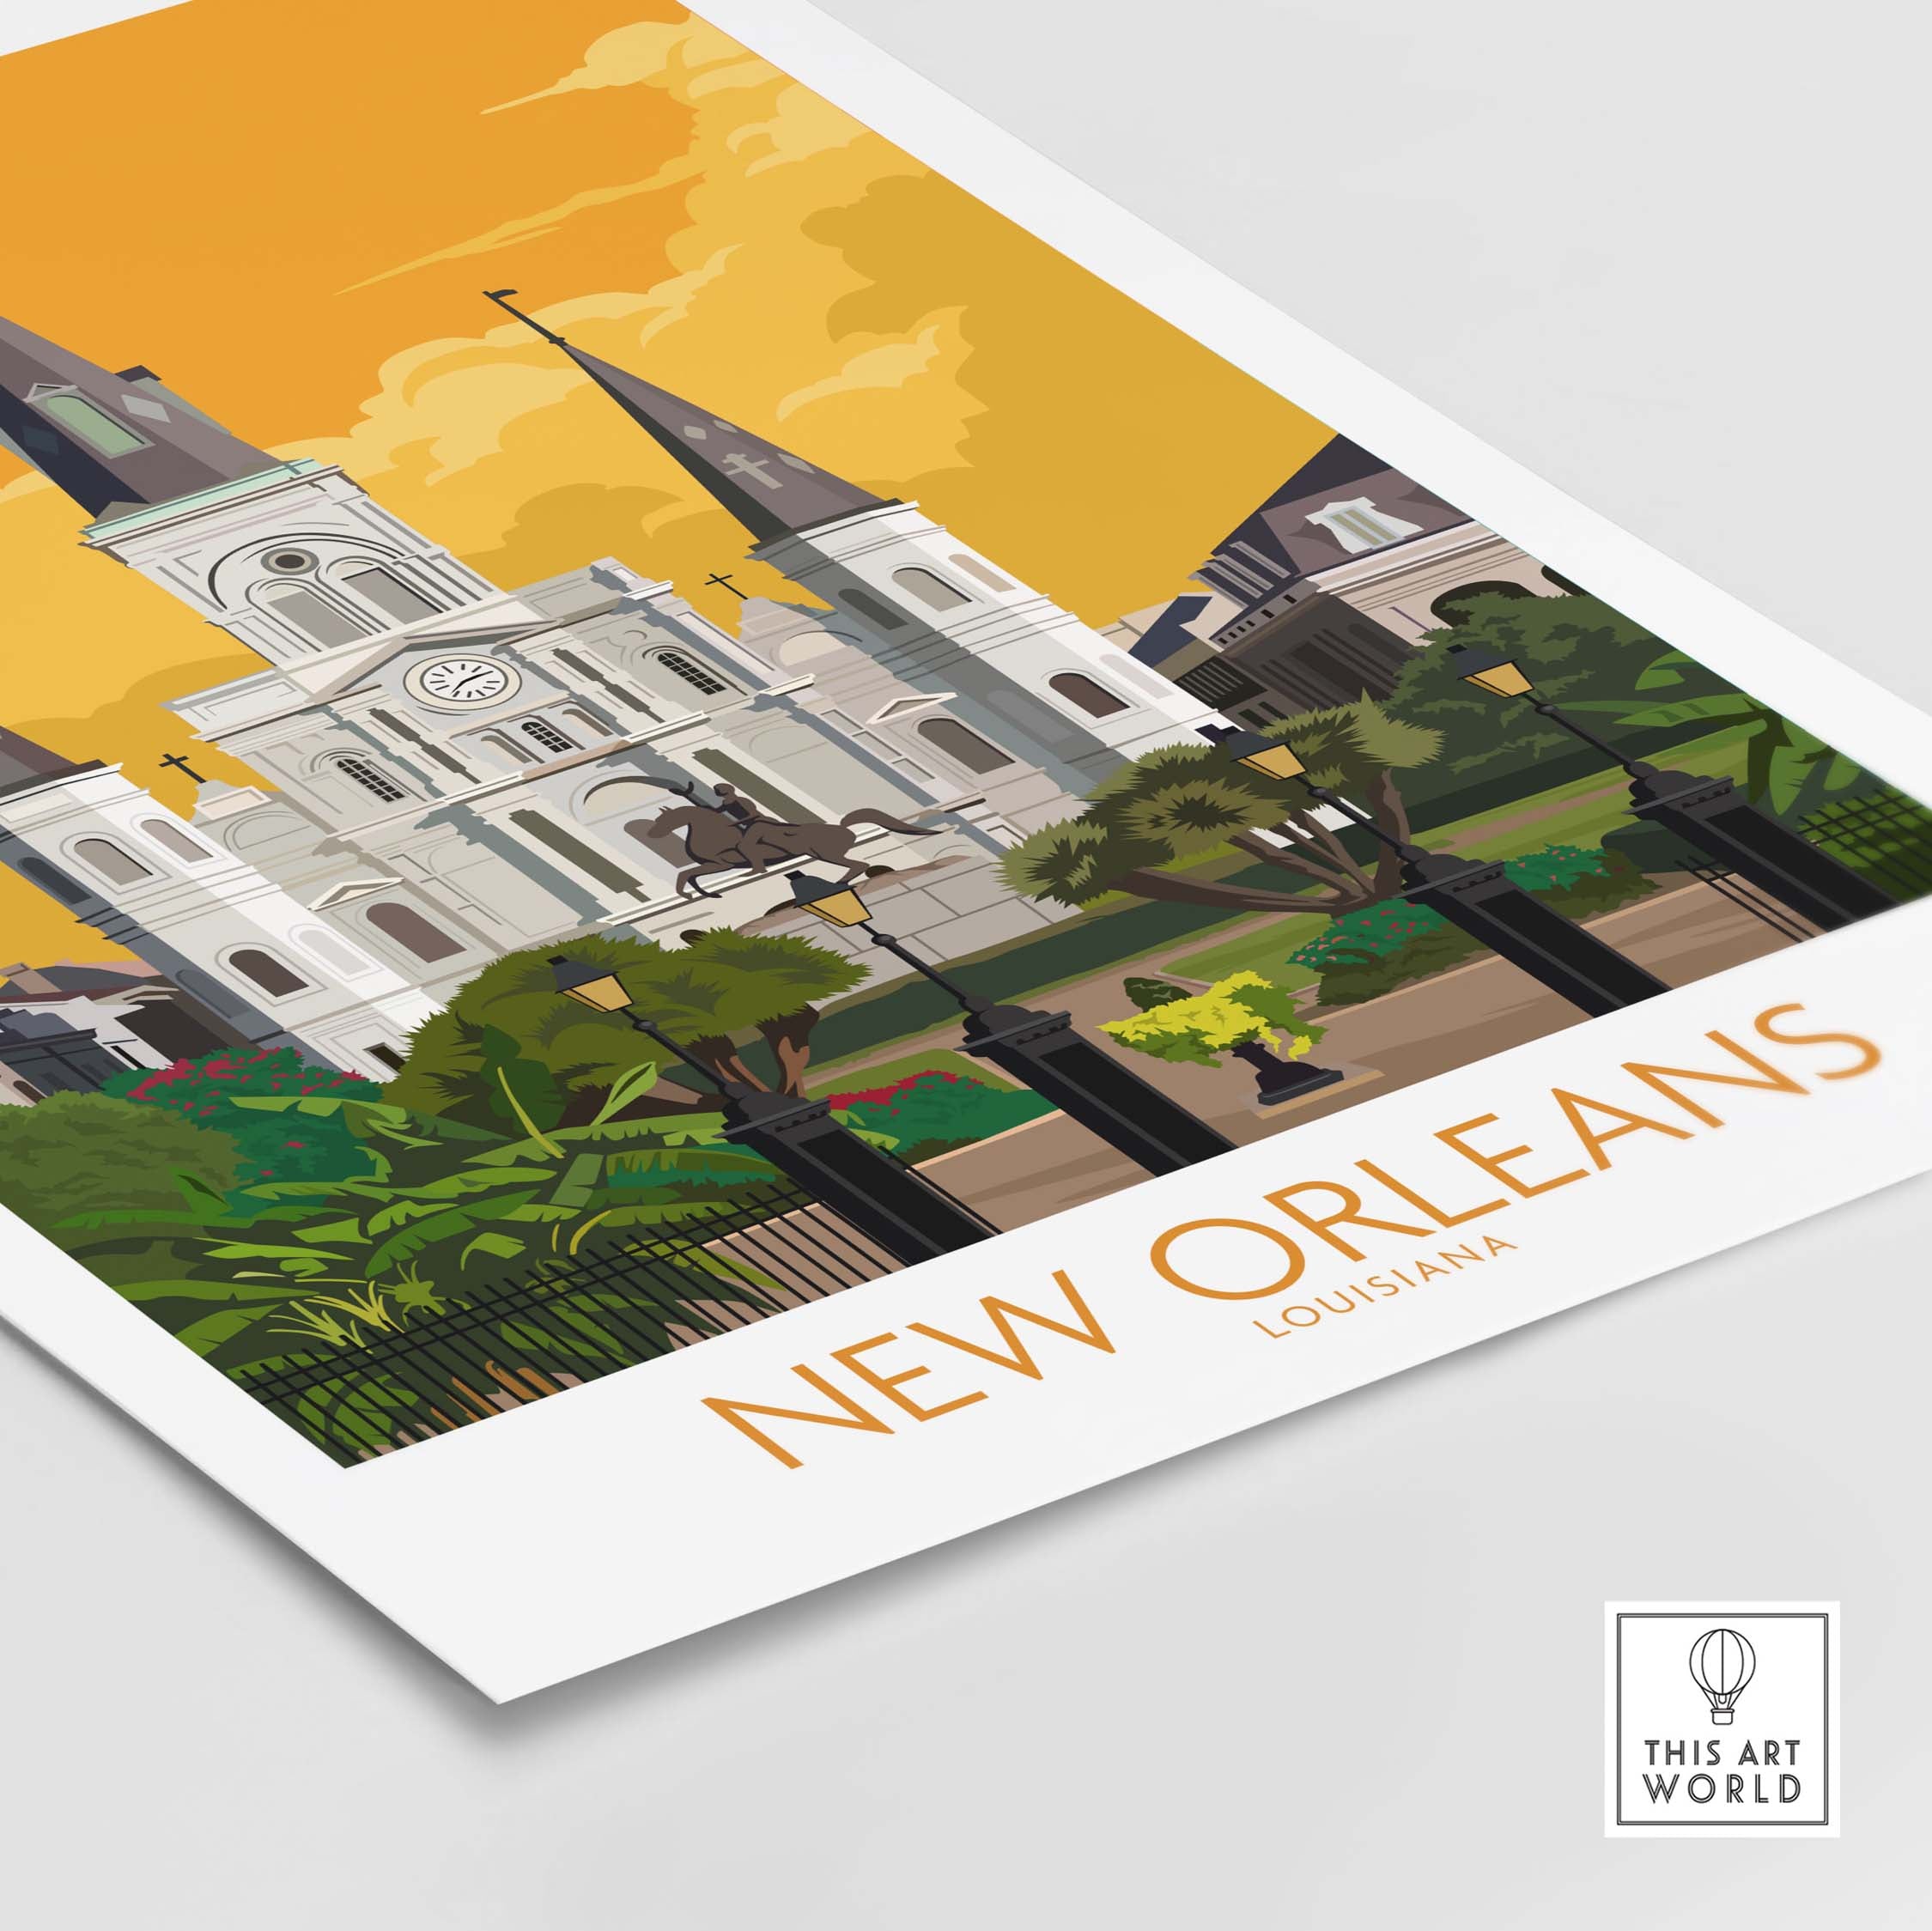 new orleans poster louisiana